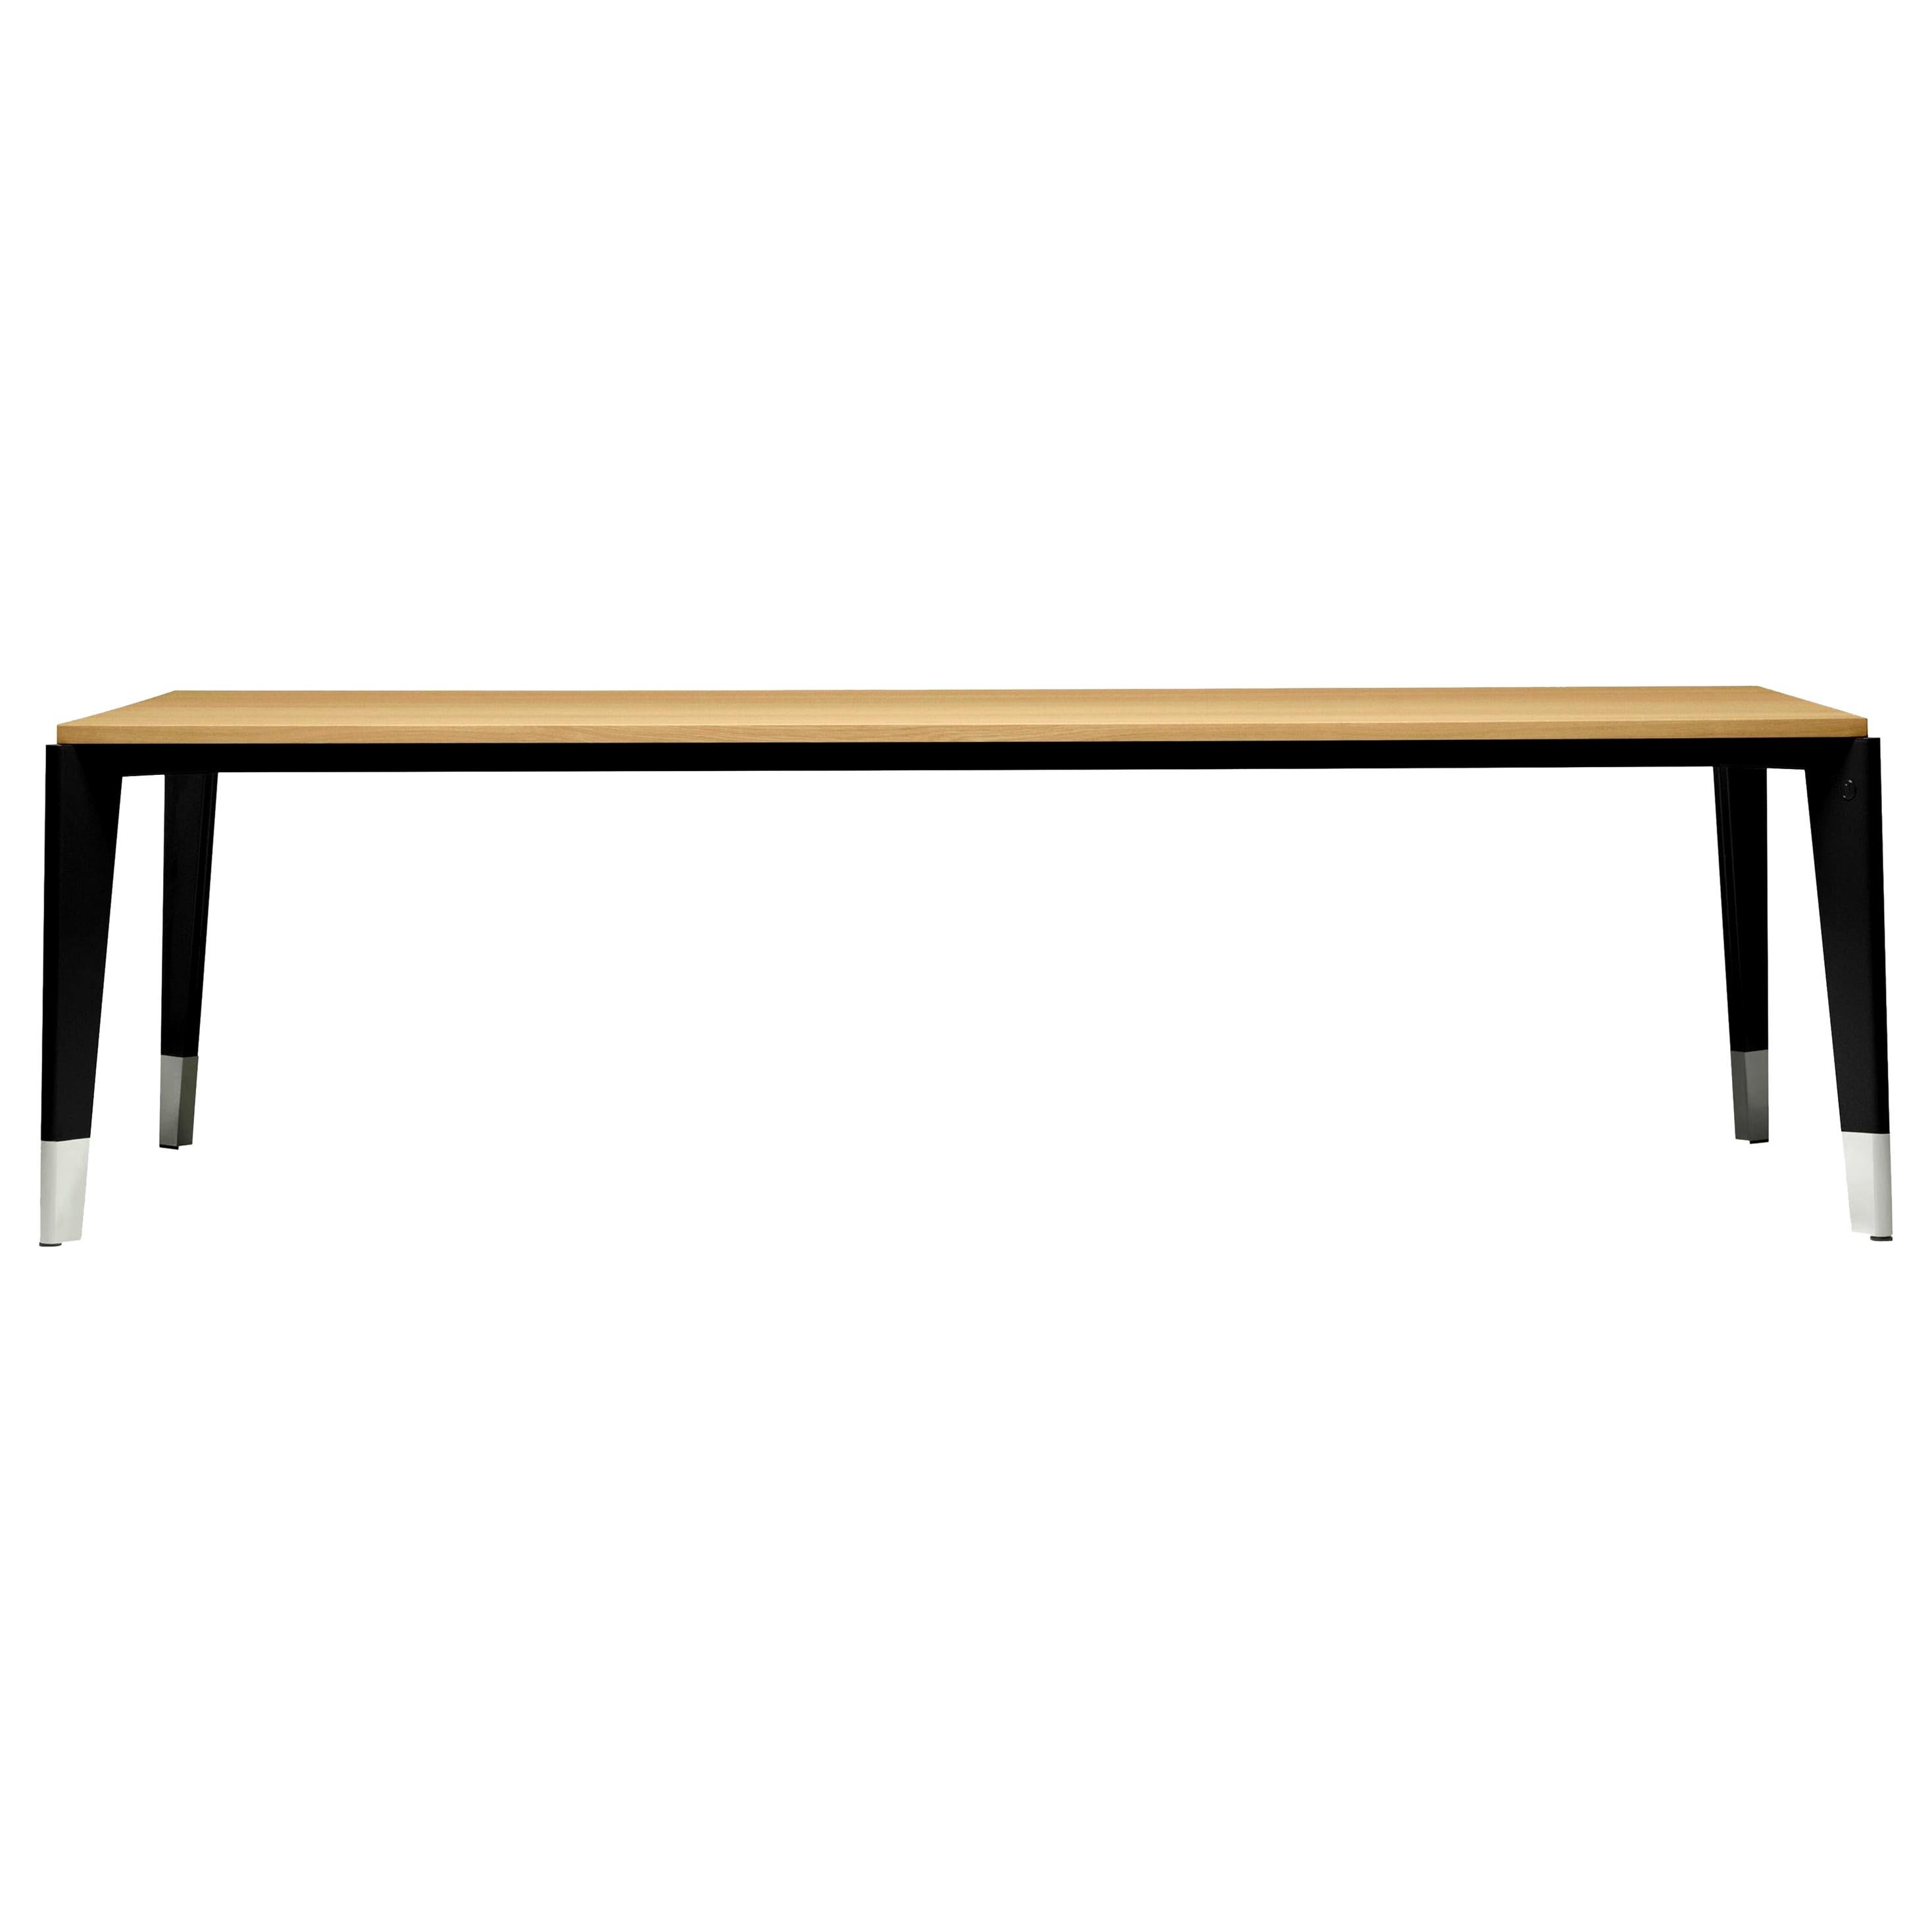 Vitra Flavigny Table in Natural Oak by Jean Prouvé